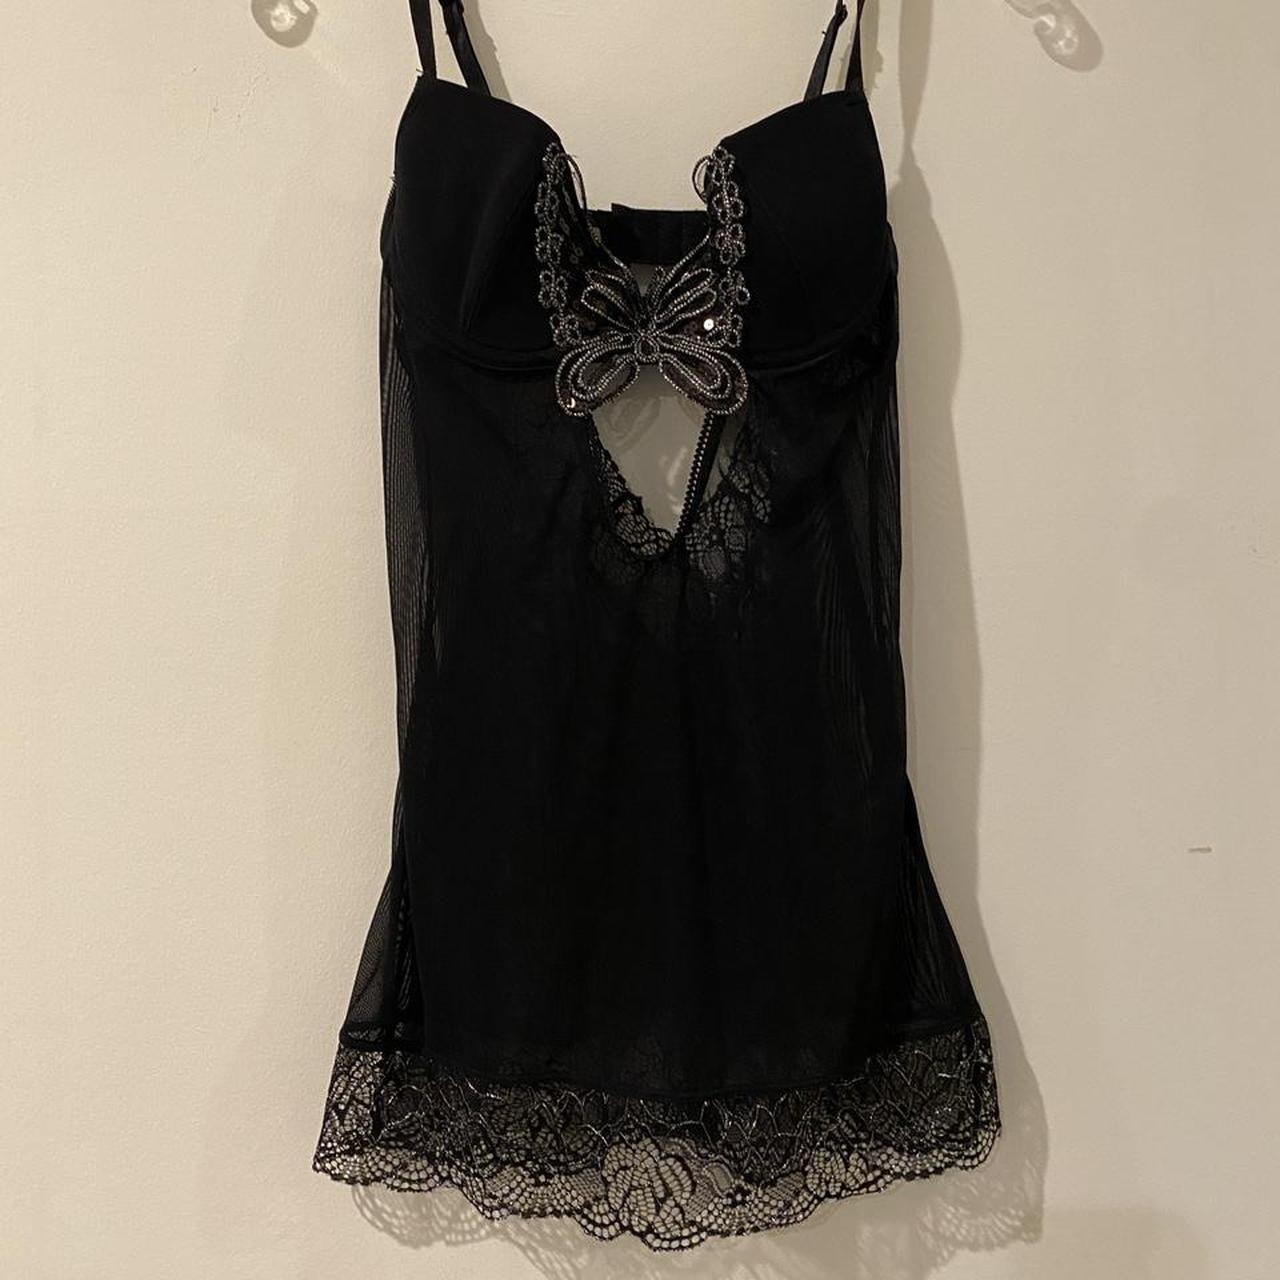 Frederick's of Hollywood Women's Black and Silver Nightwear (4)